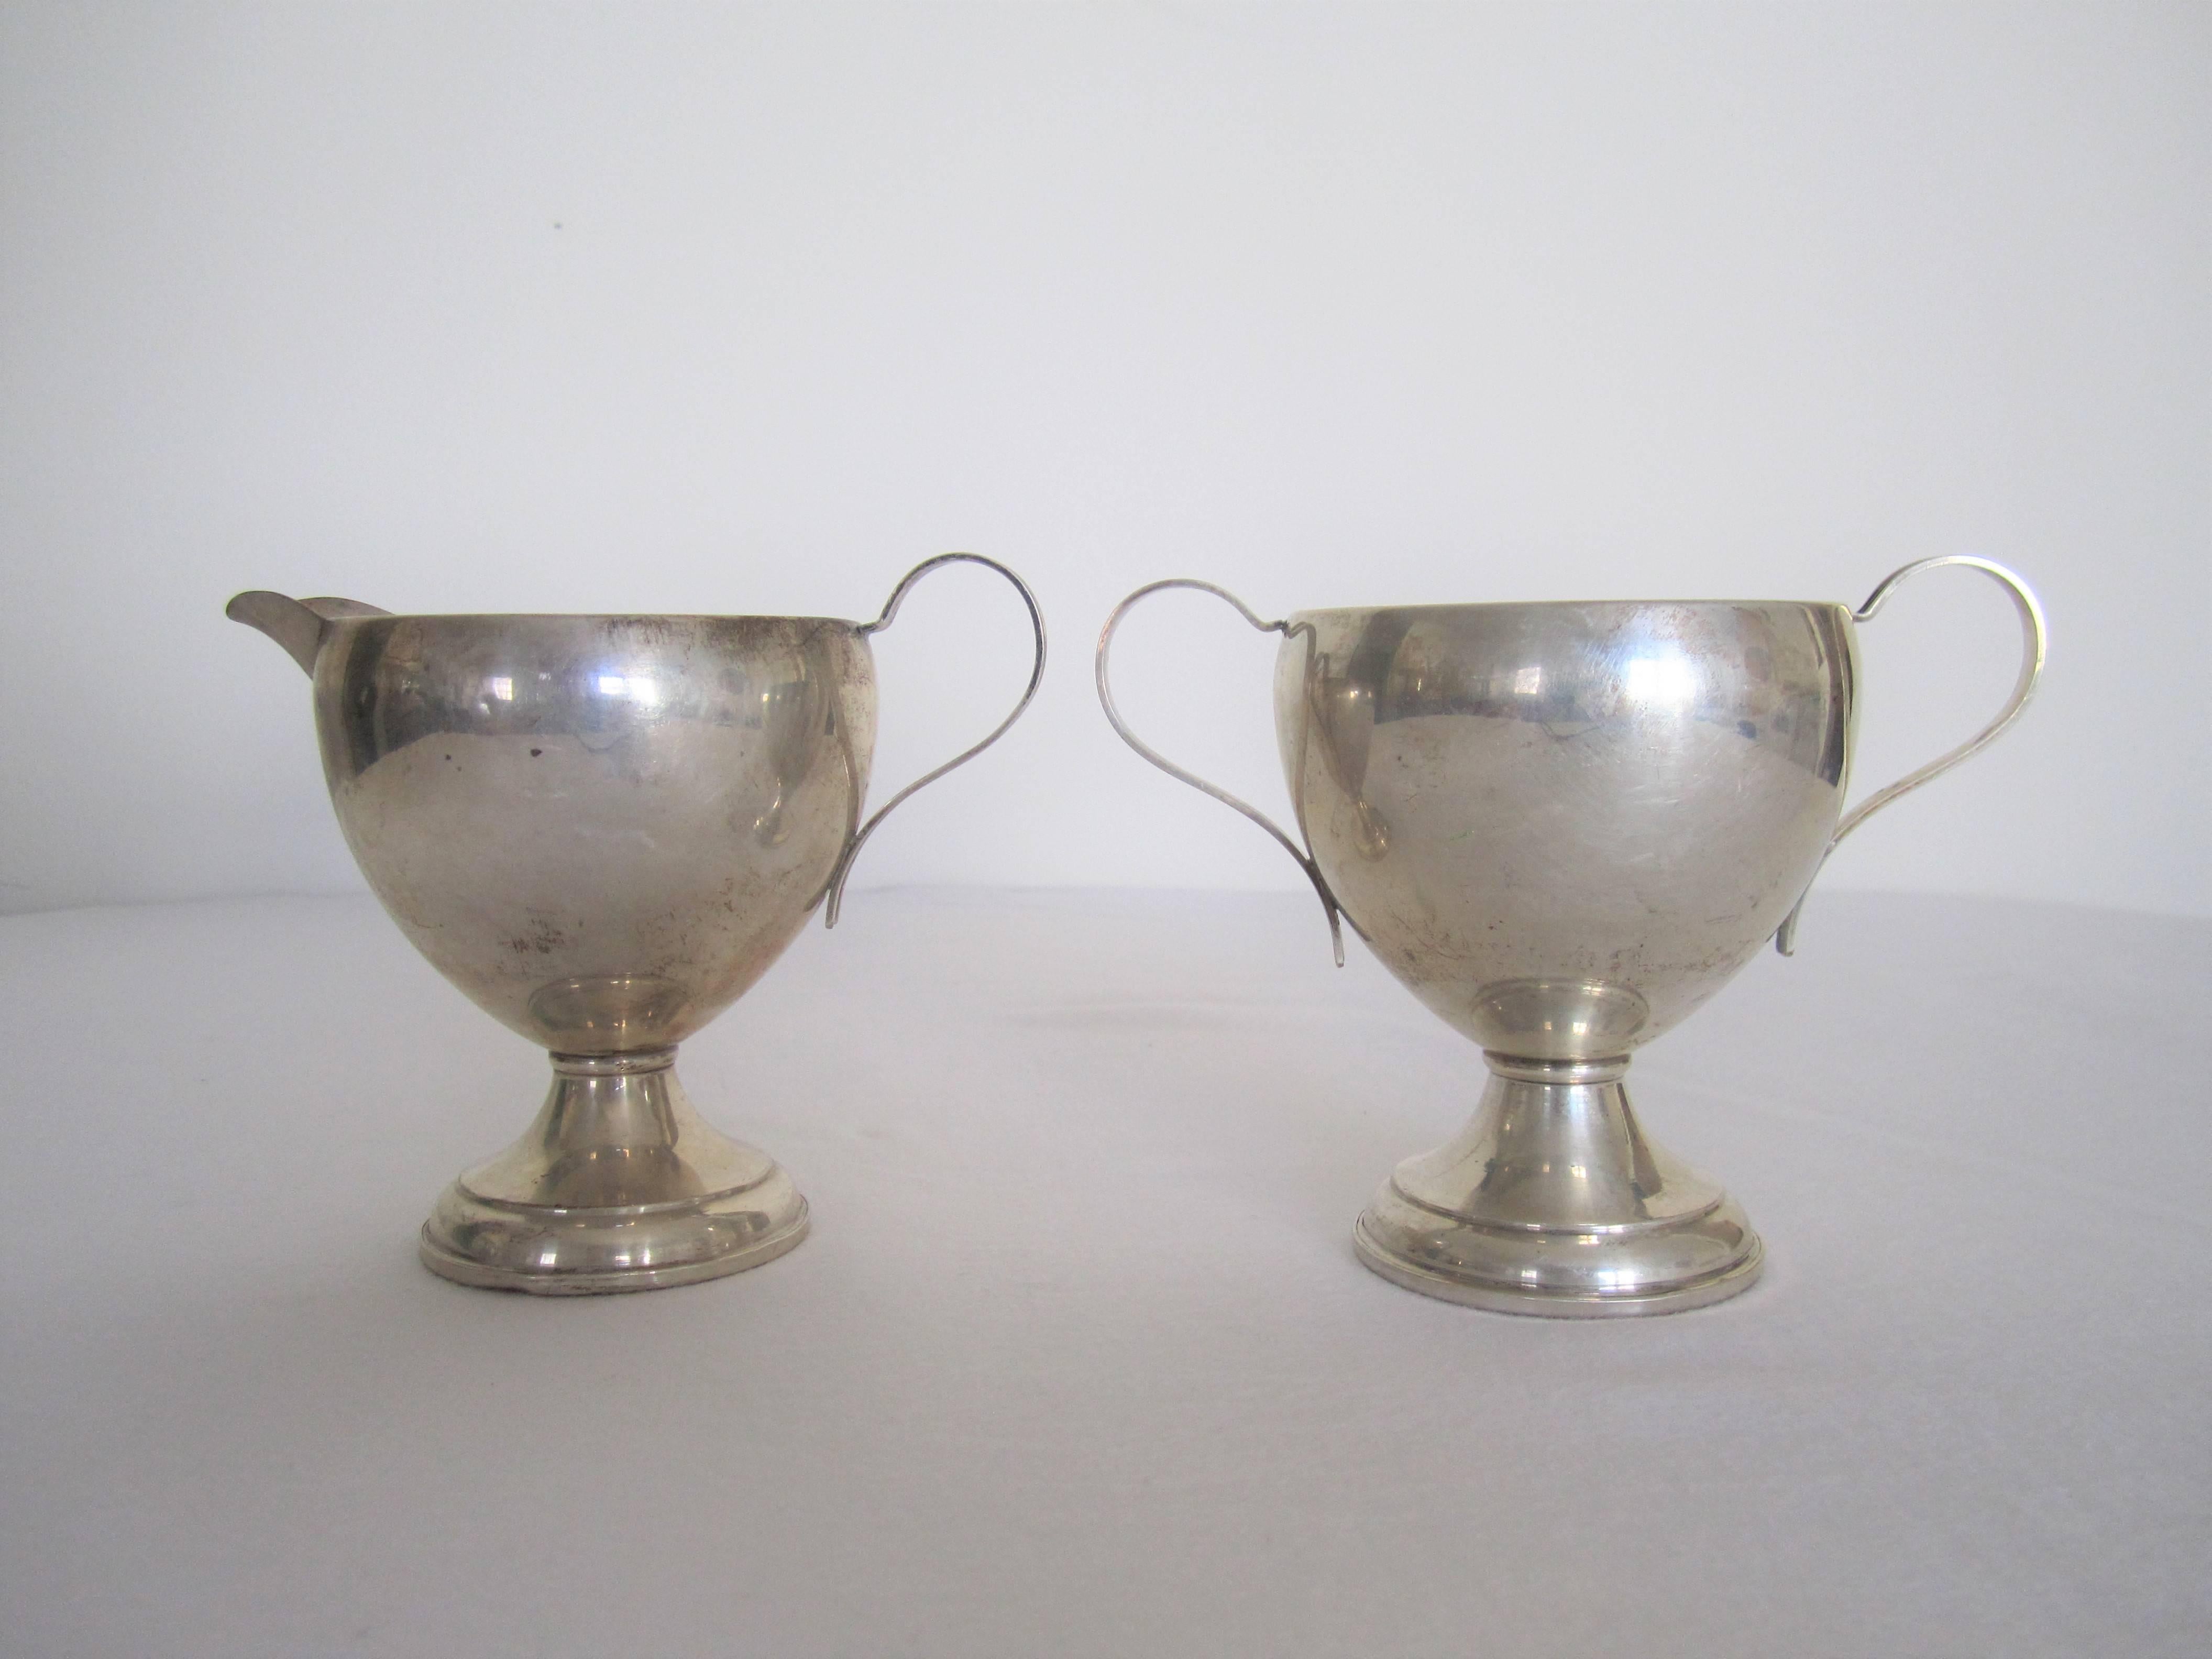 A vintage sterling silver creamer and sugar set, circa mid-20th century or earlier. With maker's mark and marked 'sterling silver' on bottom as shown in last image.

